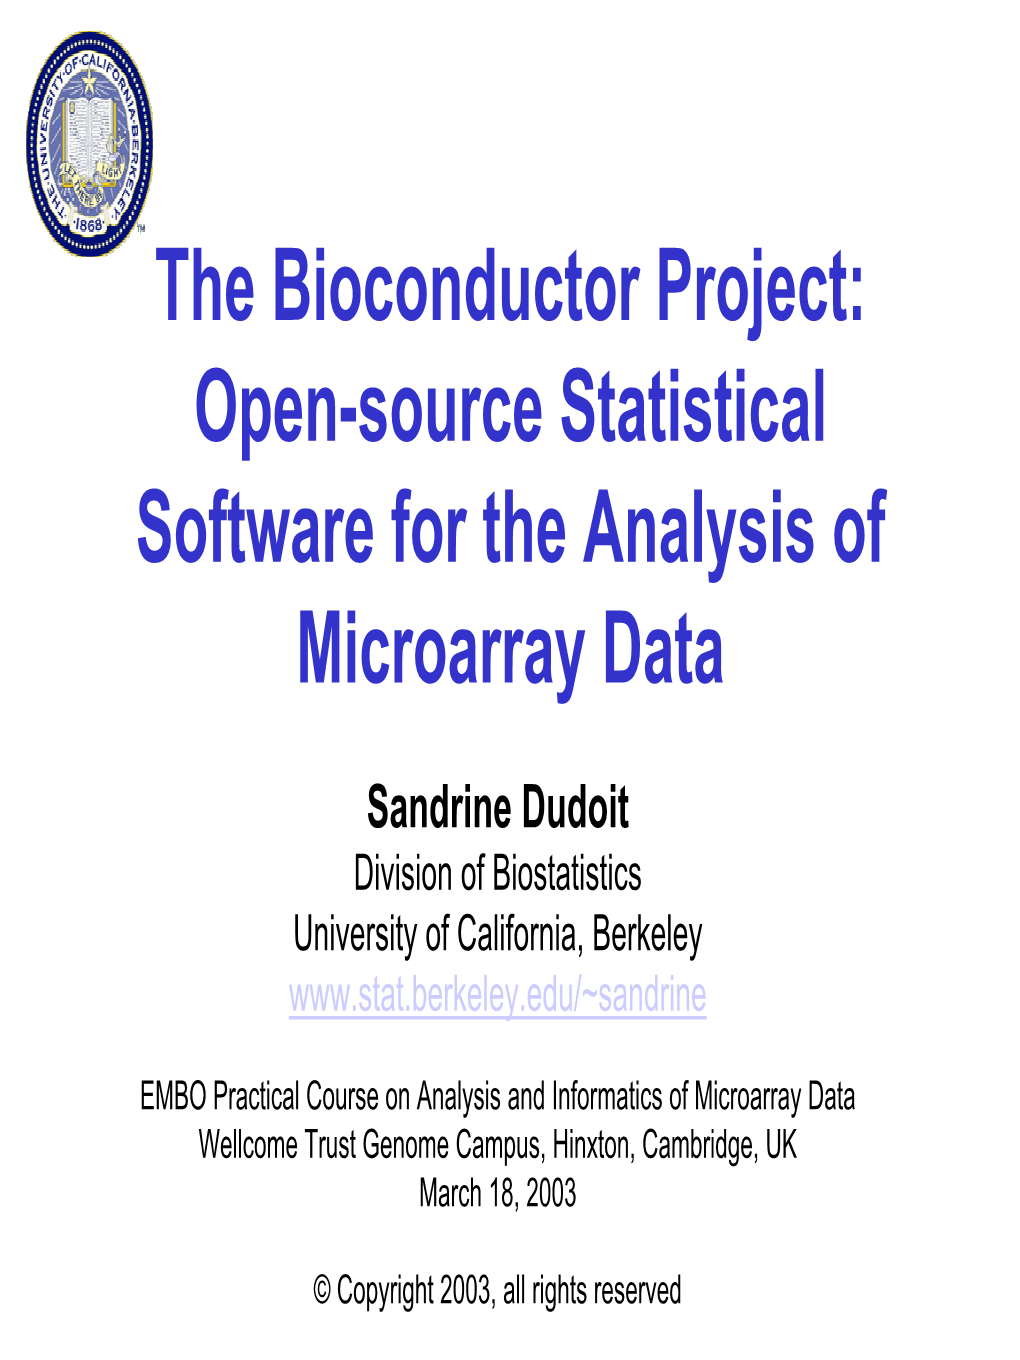 Open-Source Statistical Software for the Analysis of Microarray Data